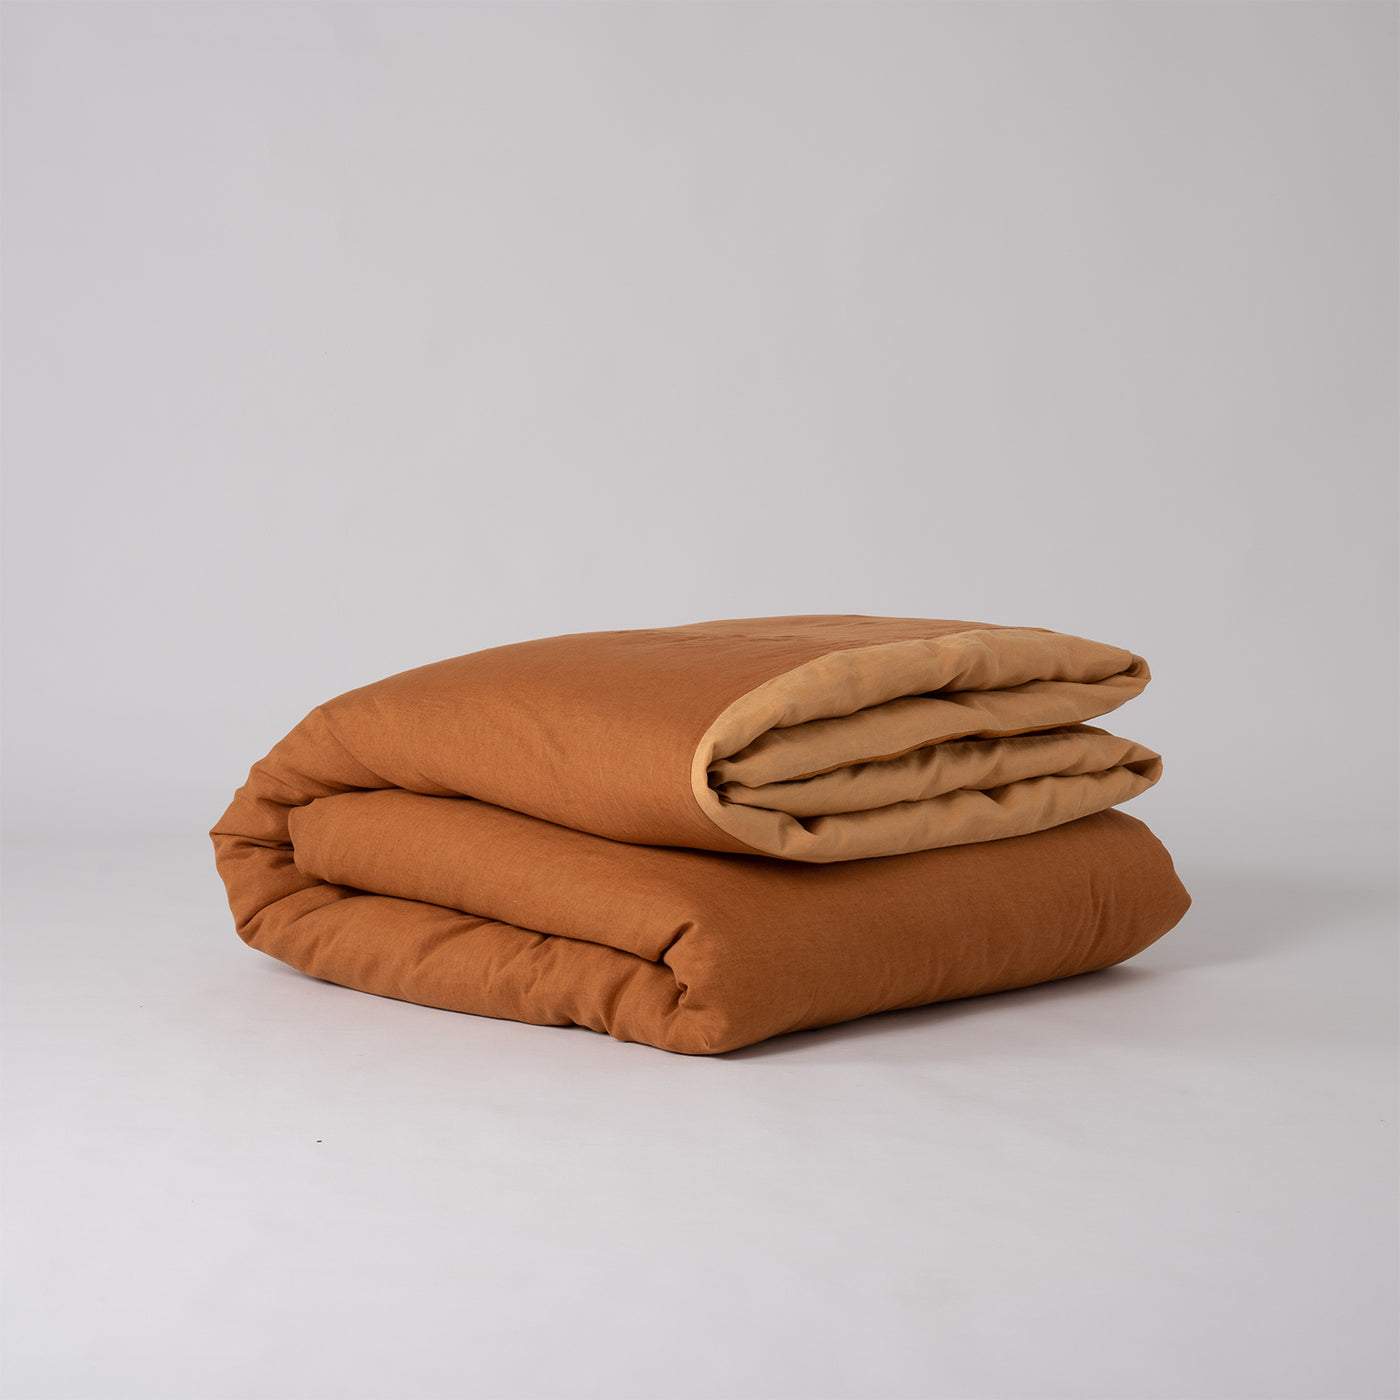 French Flax Linen Double Sided Quilt Cover in Ochre/Sandalwood